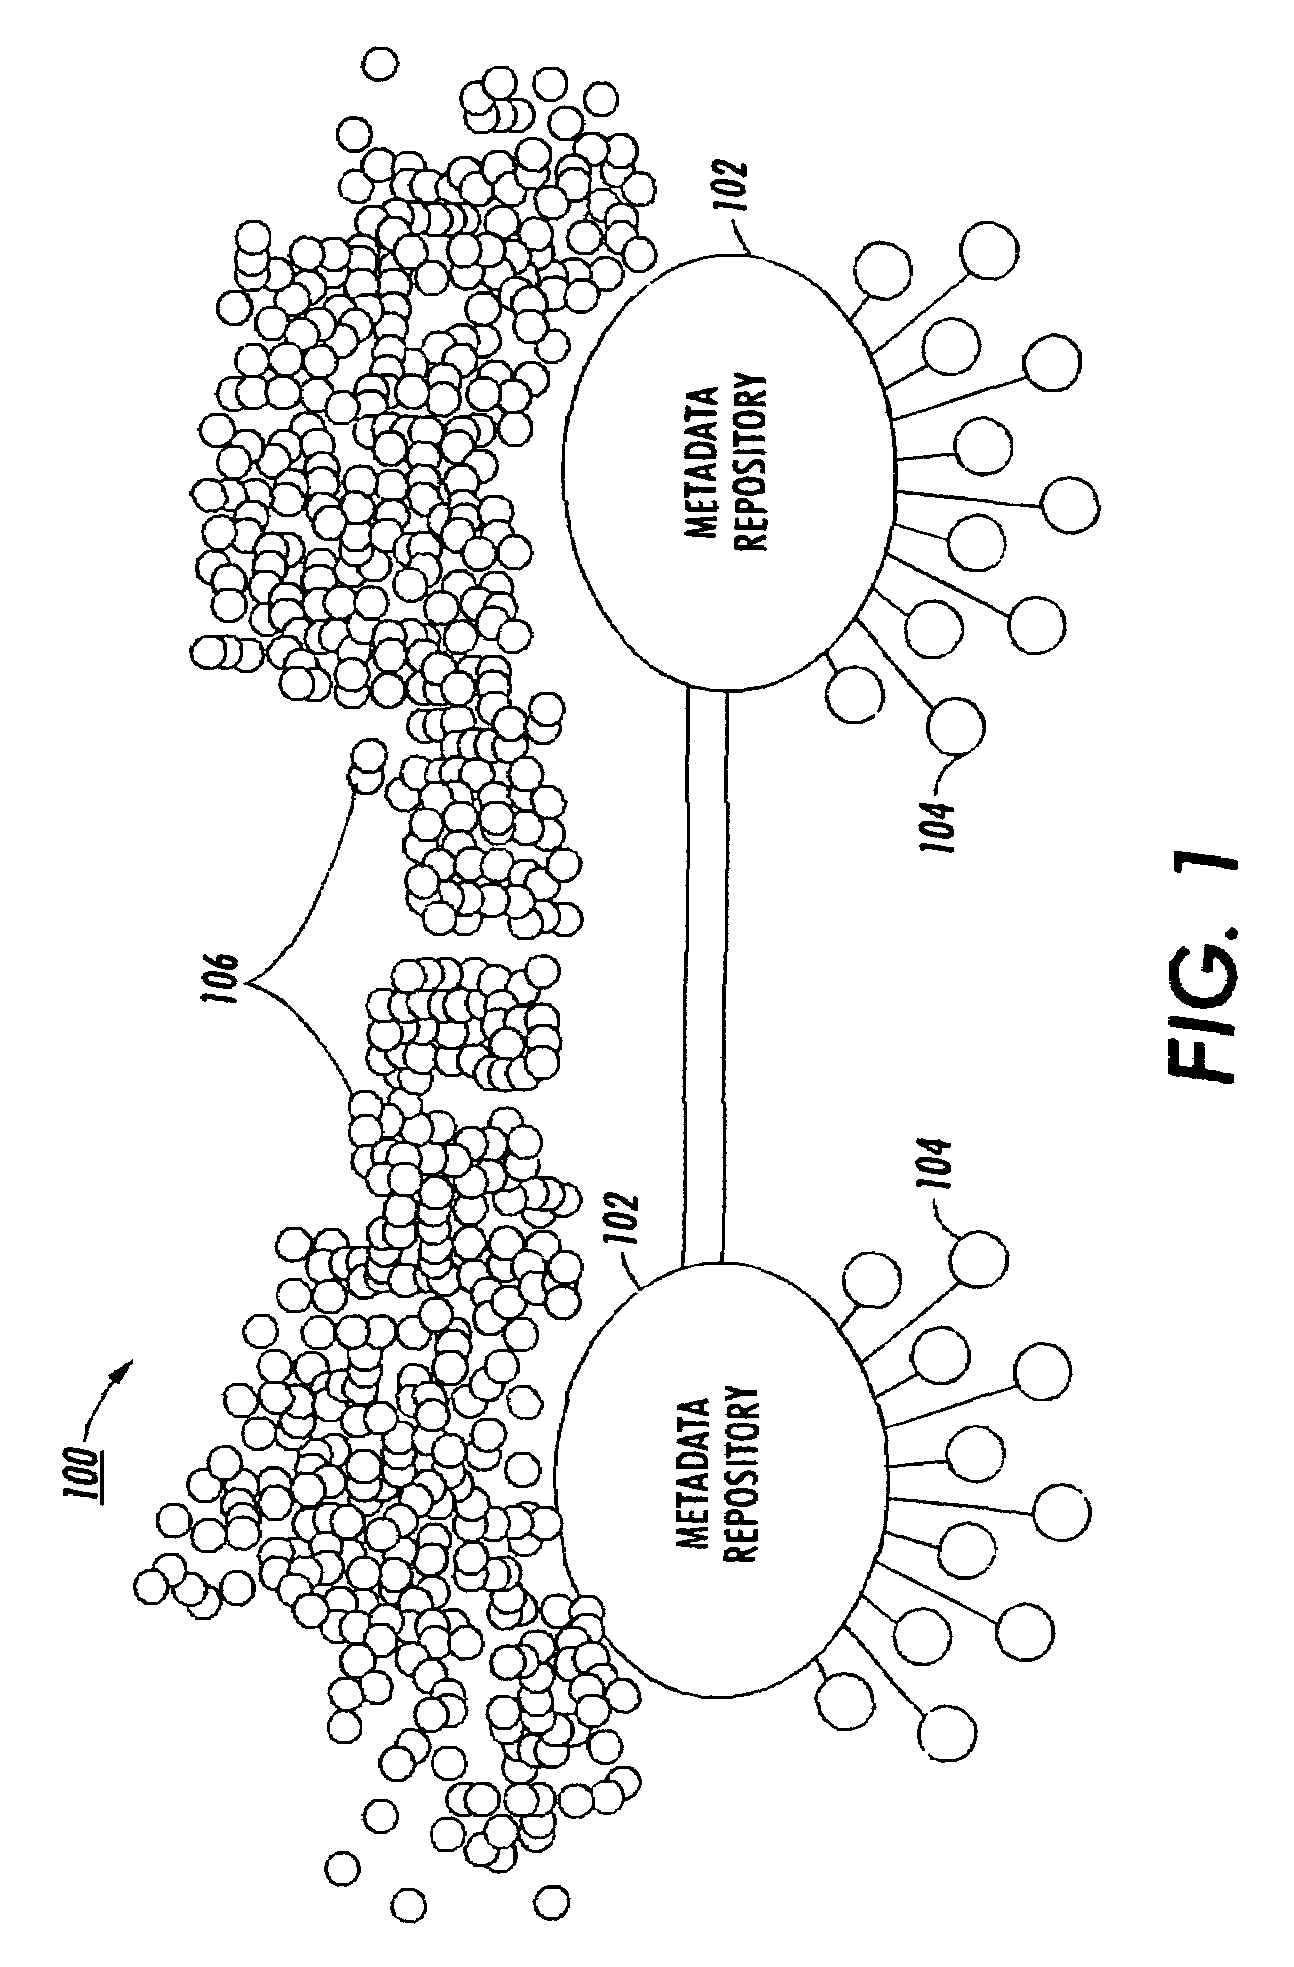 Multi-tiered structure for file sharing based on social roles